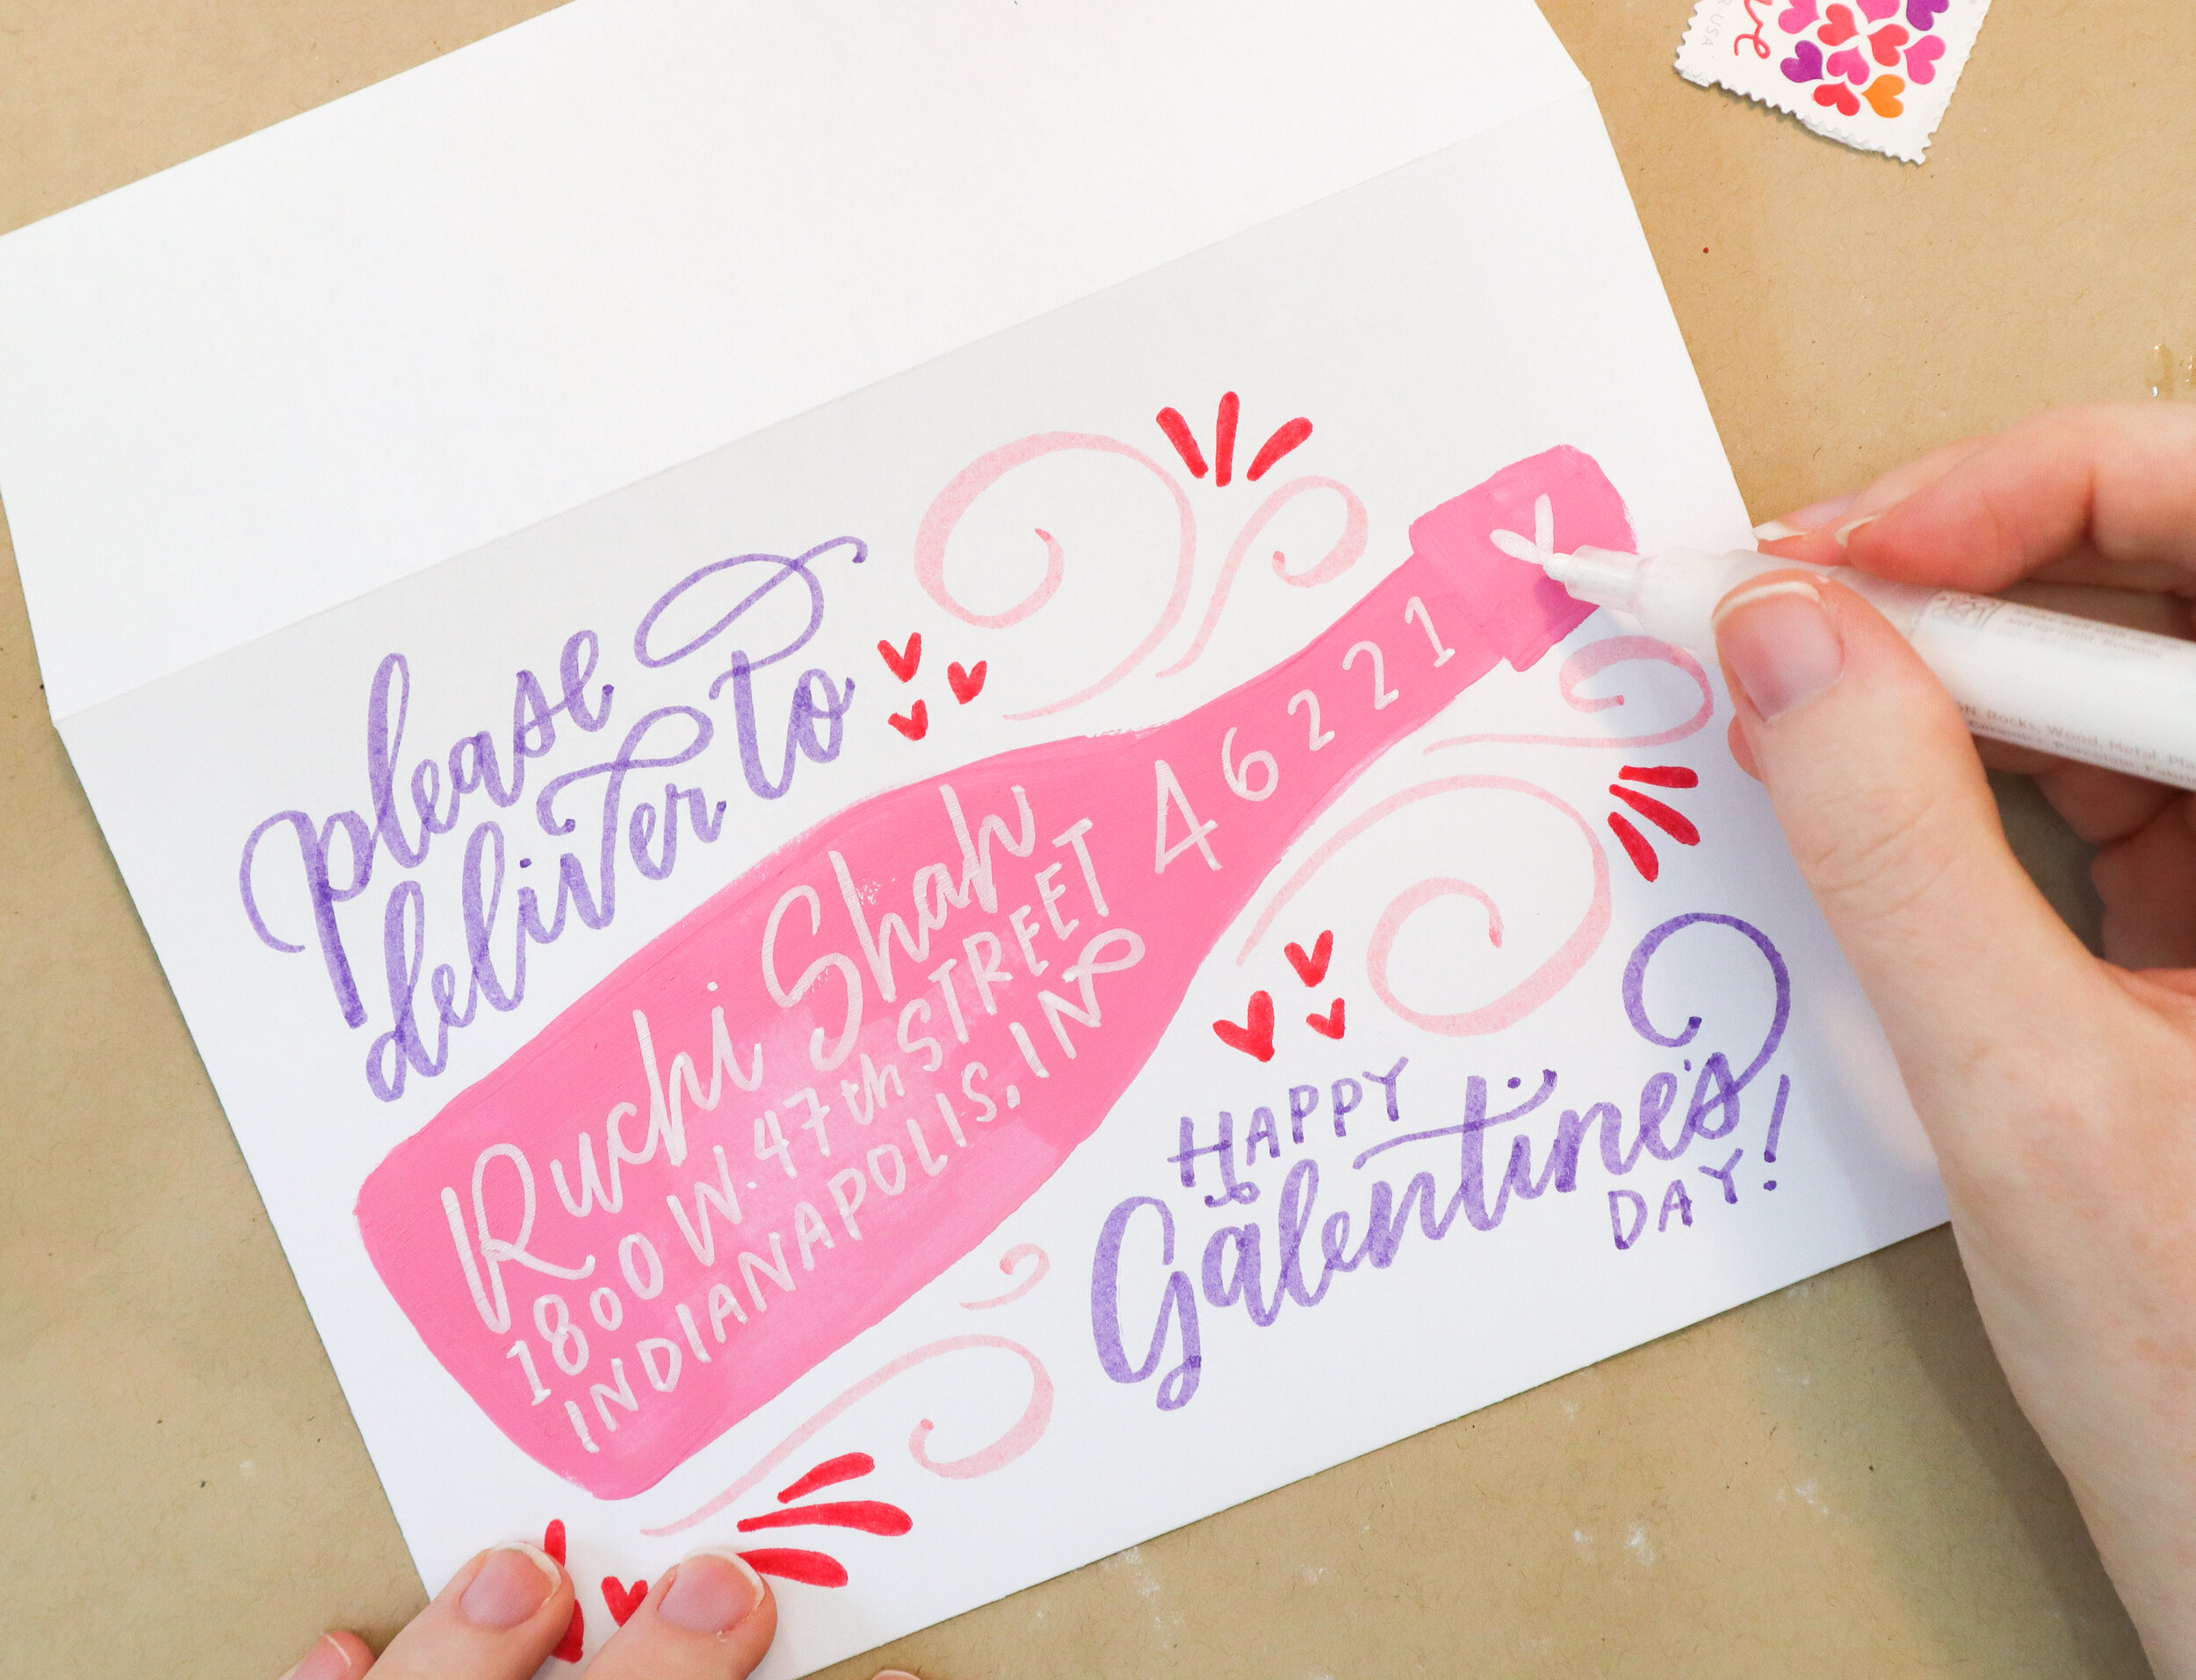 Galentine's Champagne Mail Art Tutorial | Hoopla! Letters